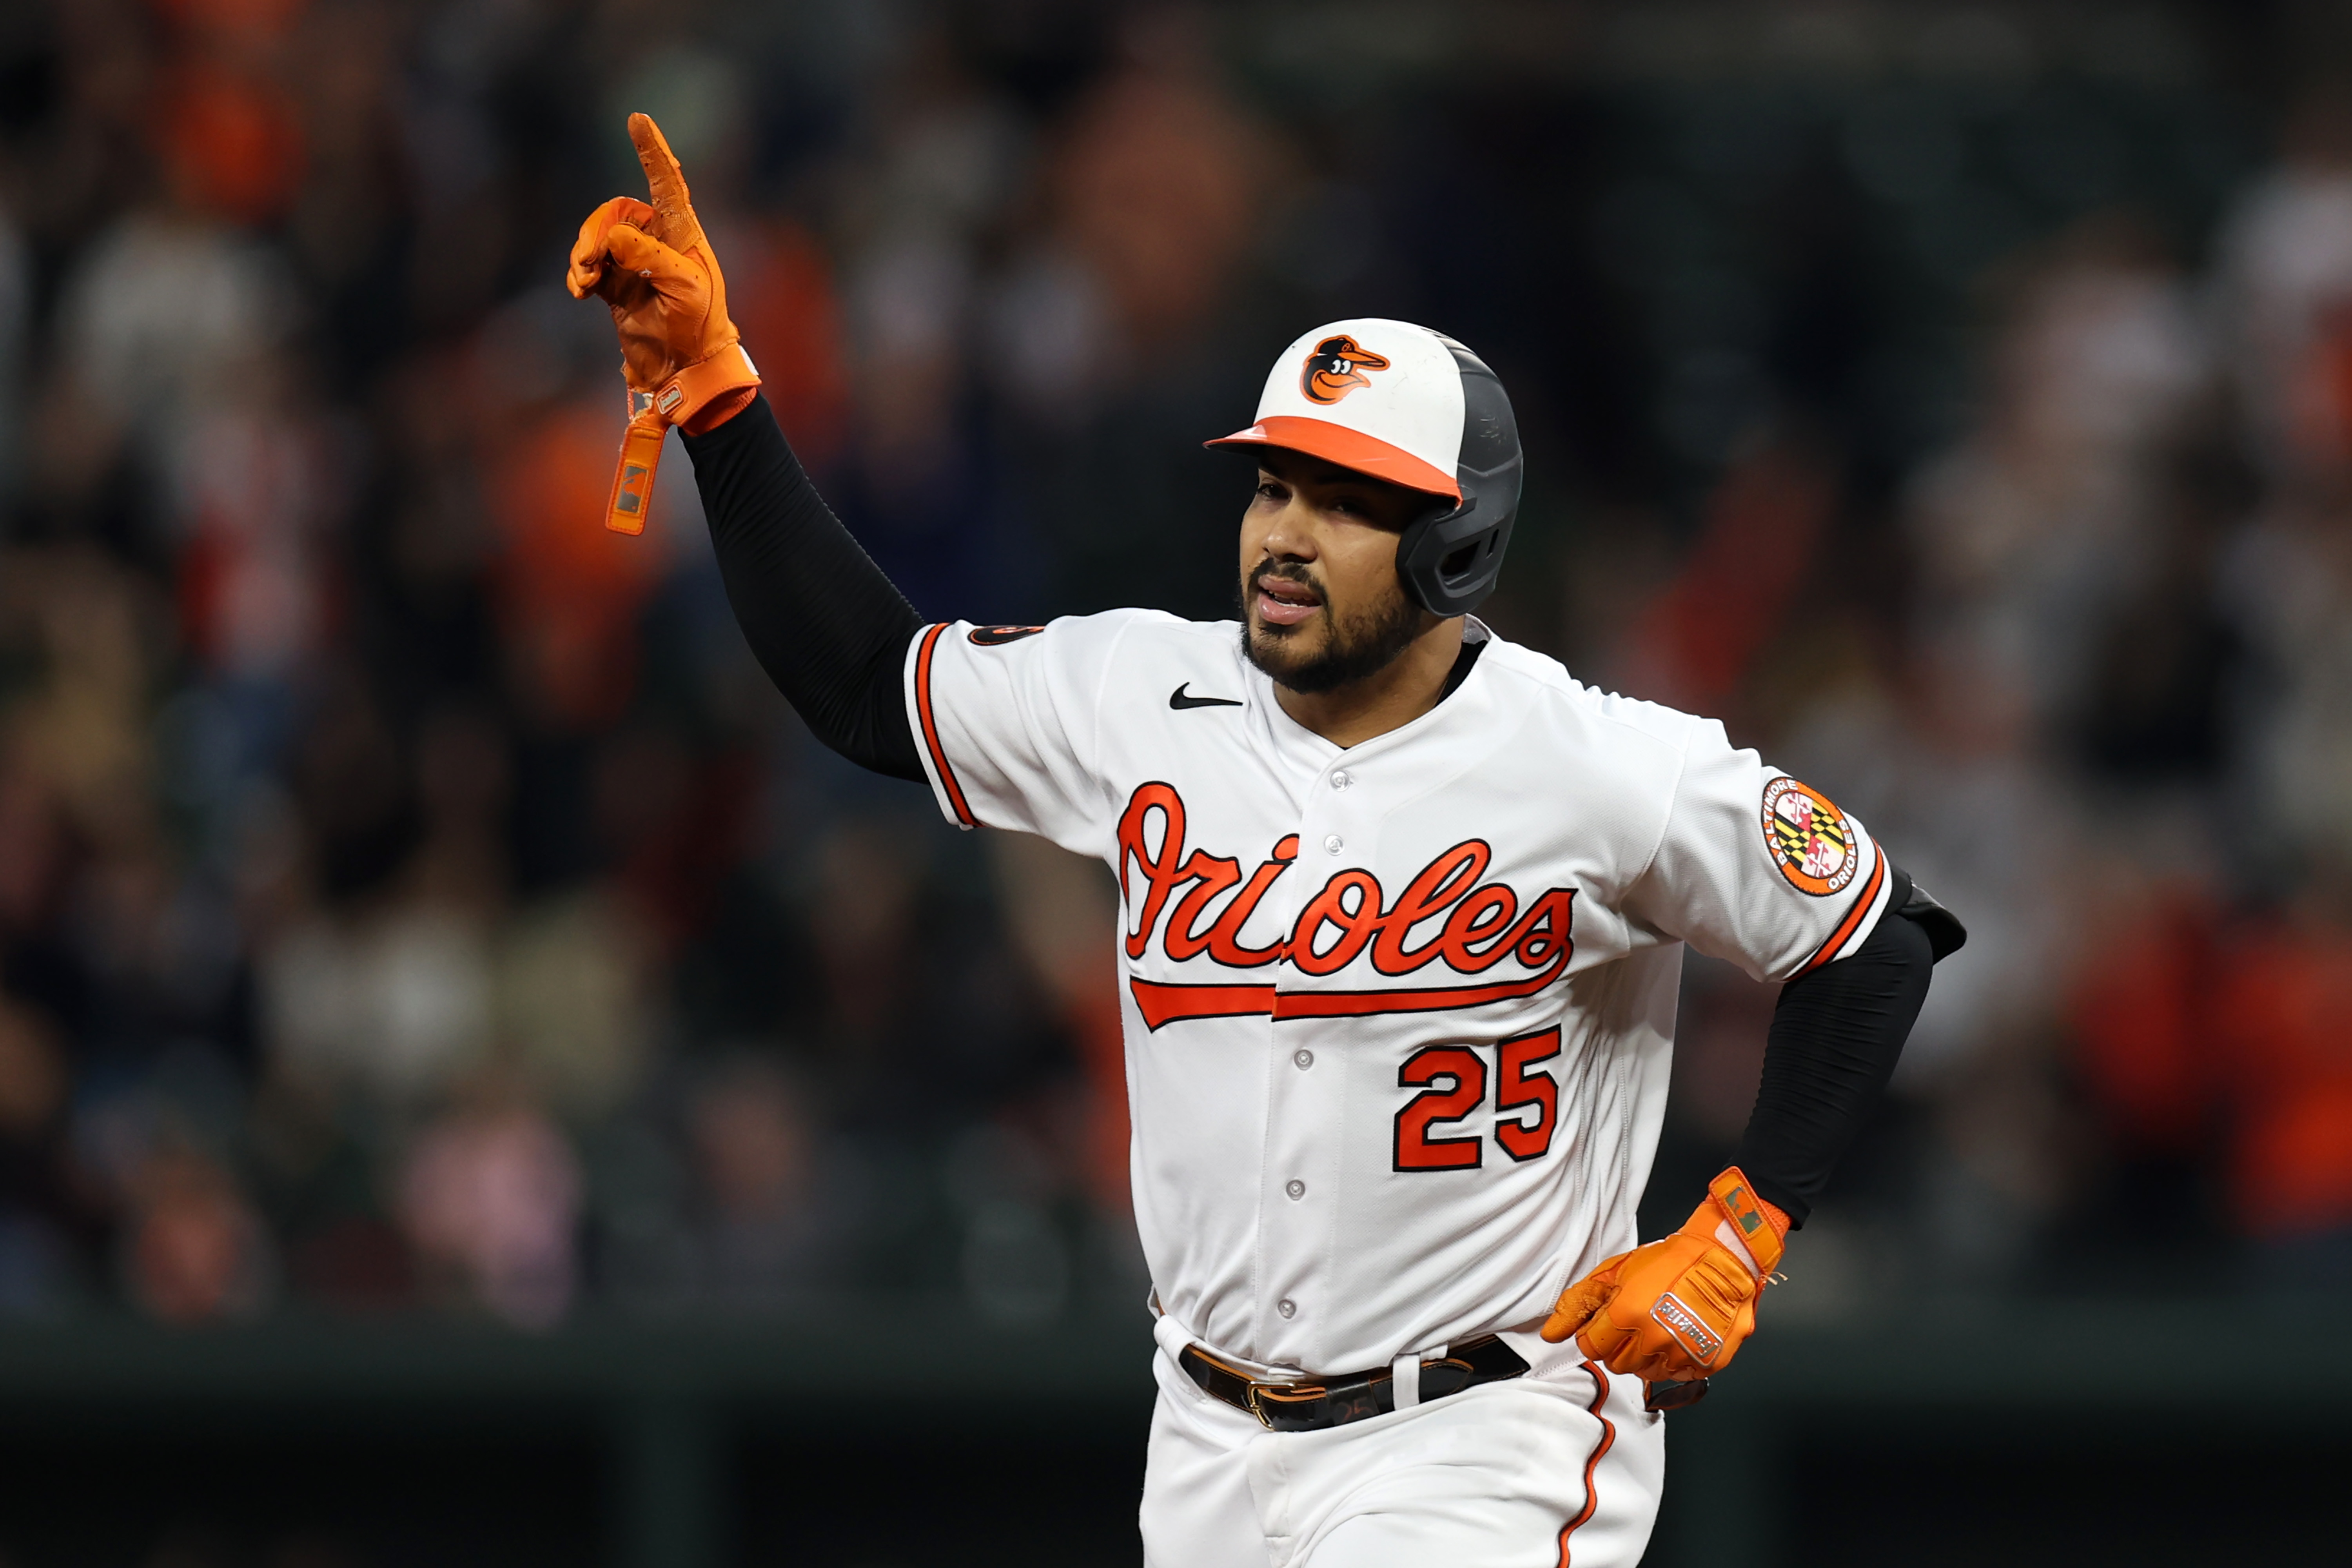 The Orioles first win of the season GIF party - Camden Chat